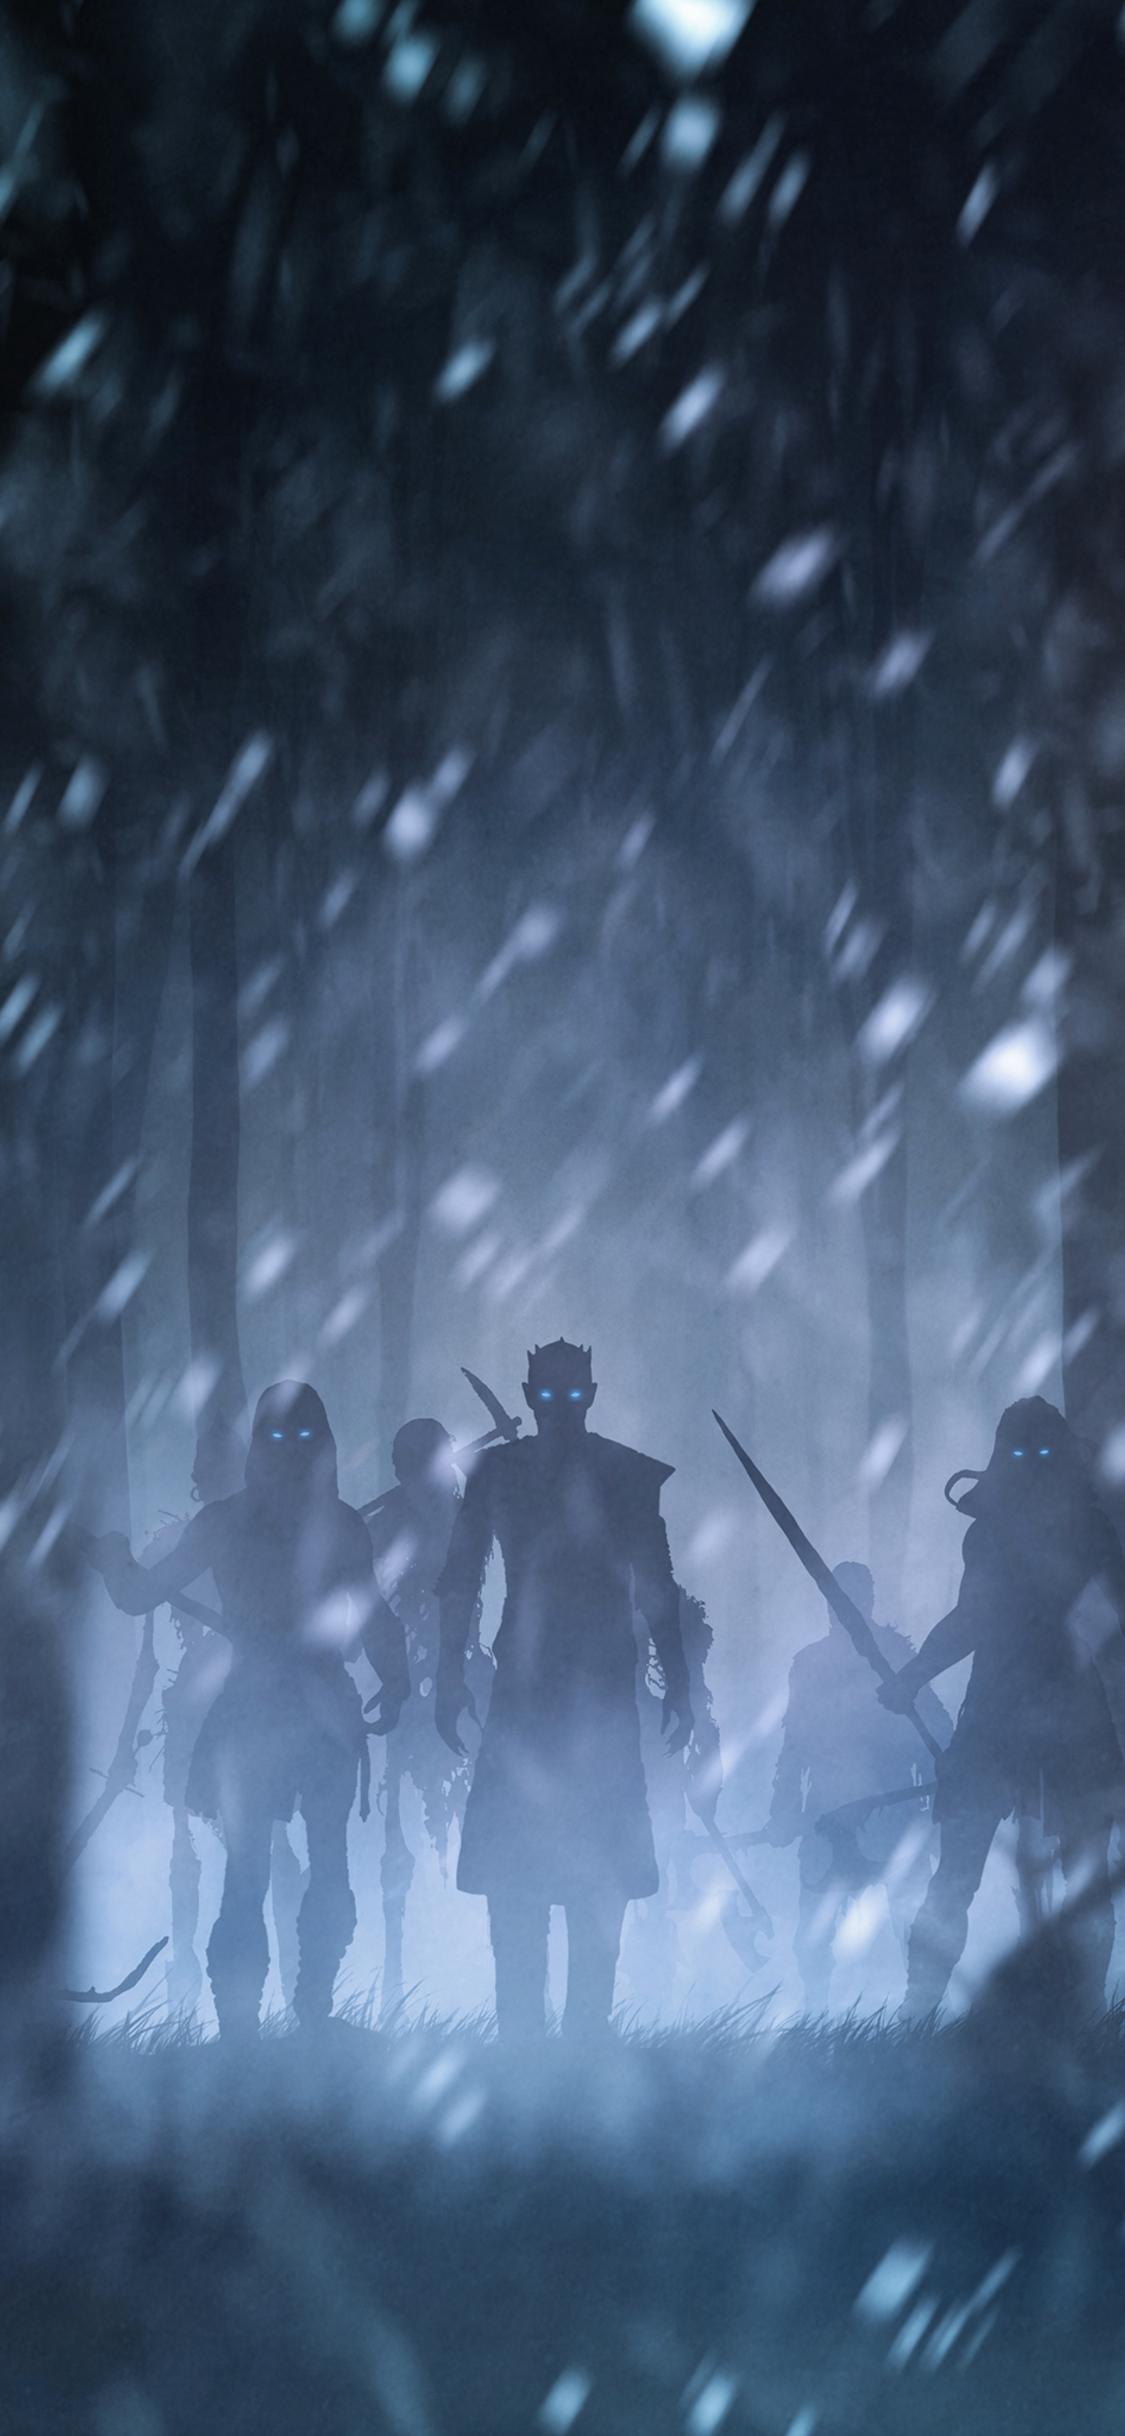 Best Game of Thrones wallpaper for iPhone